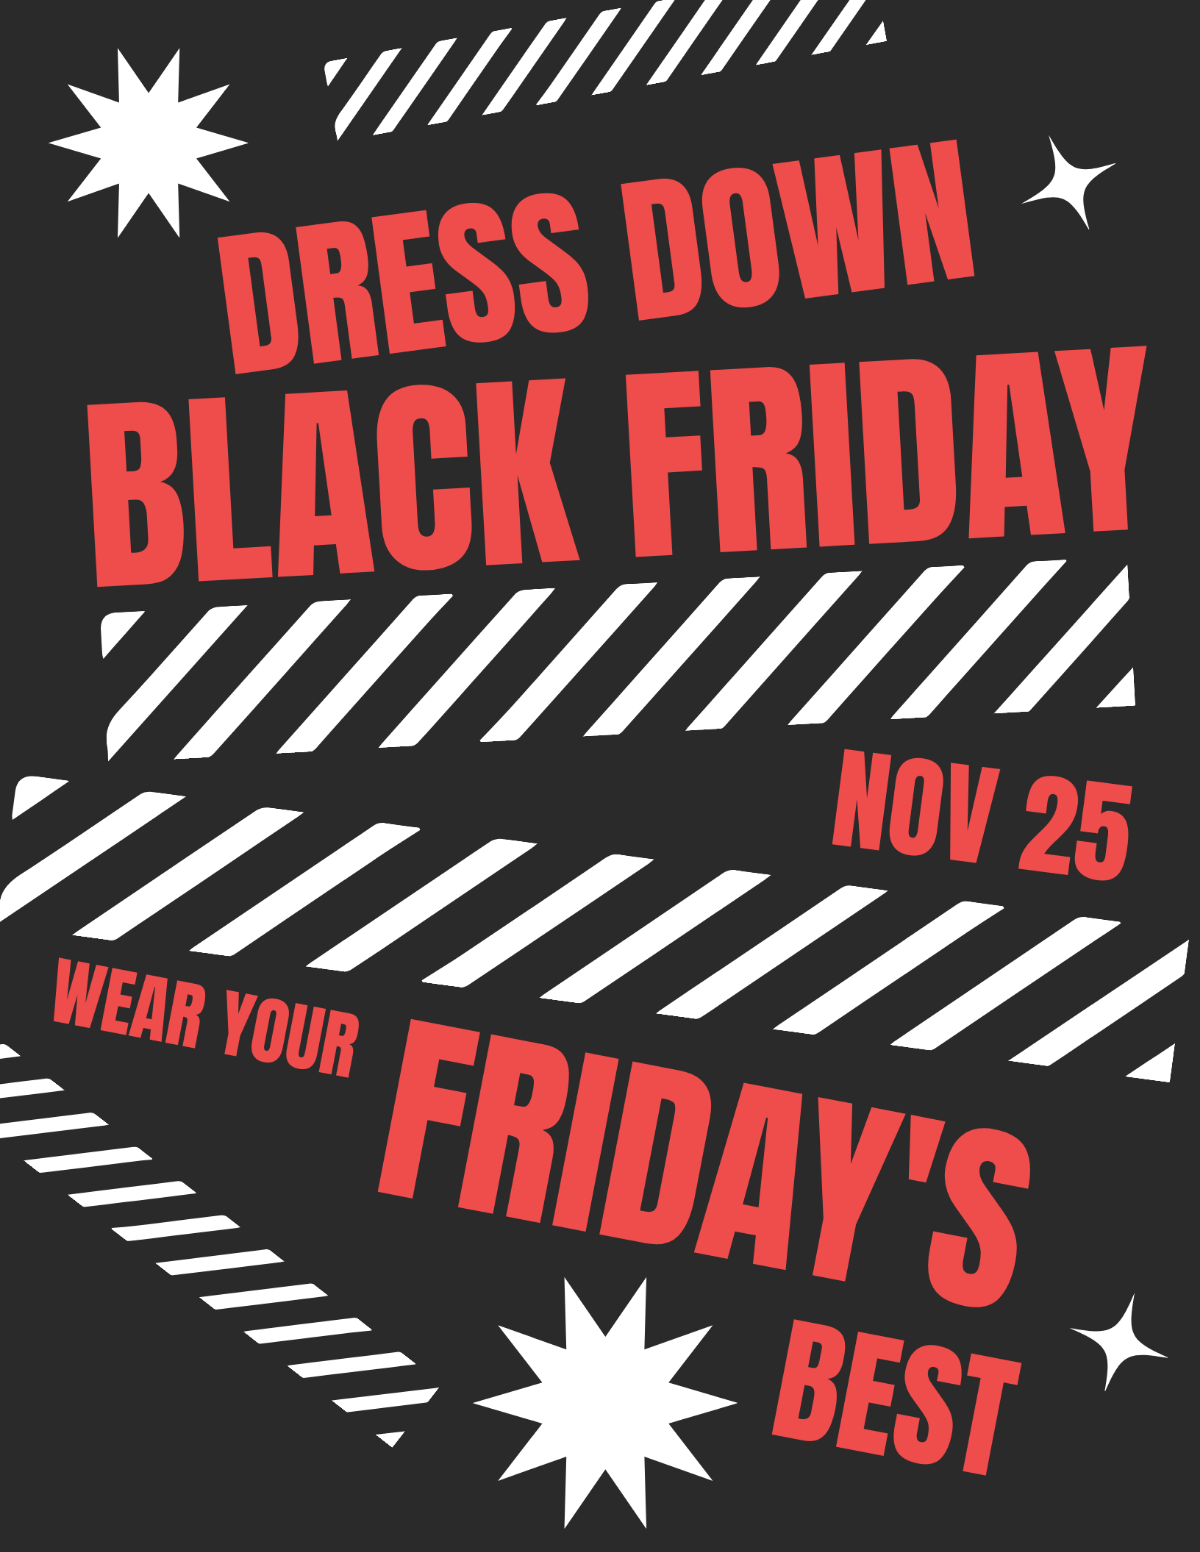 Black Friday Event Flyer Template